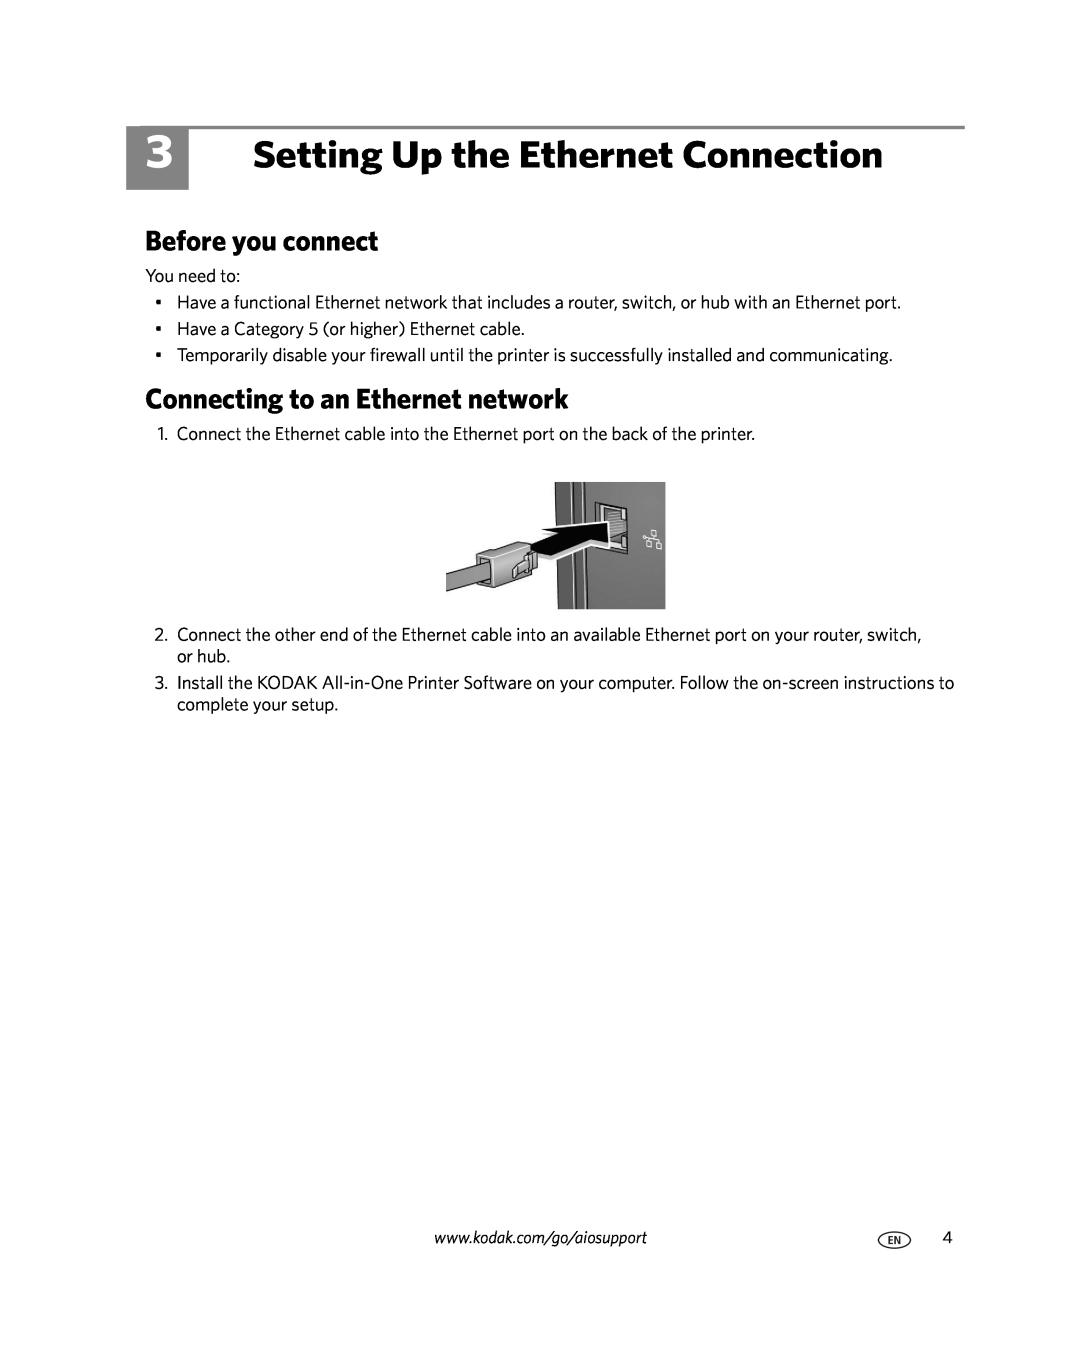 Kodak 1K5857, ESP7200 setup guide Setting Up the Ethernet Connection, Connecting to an Ethernet network, Before you connect 